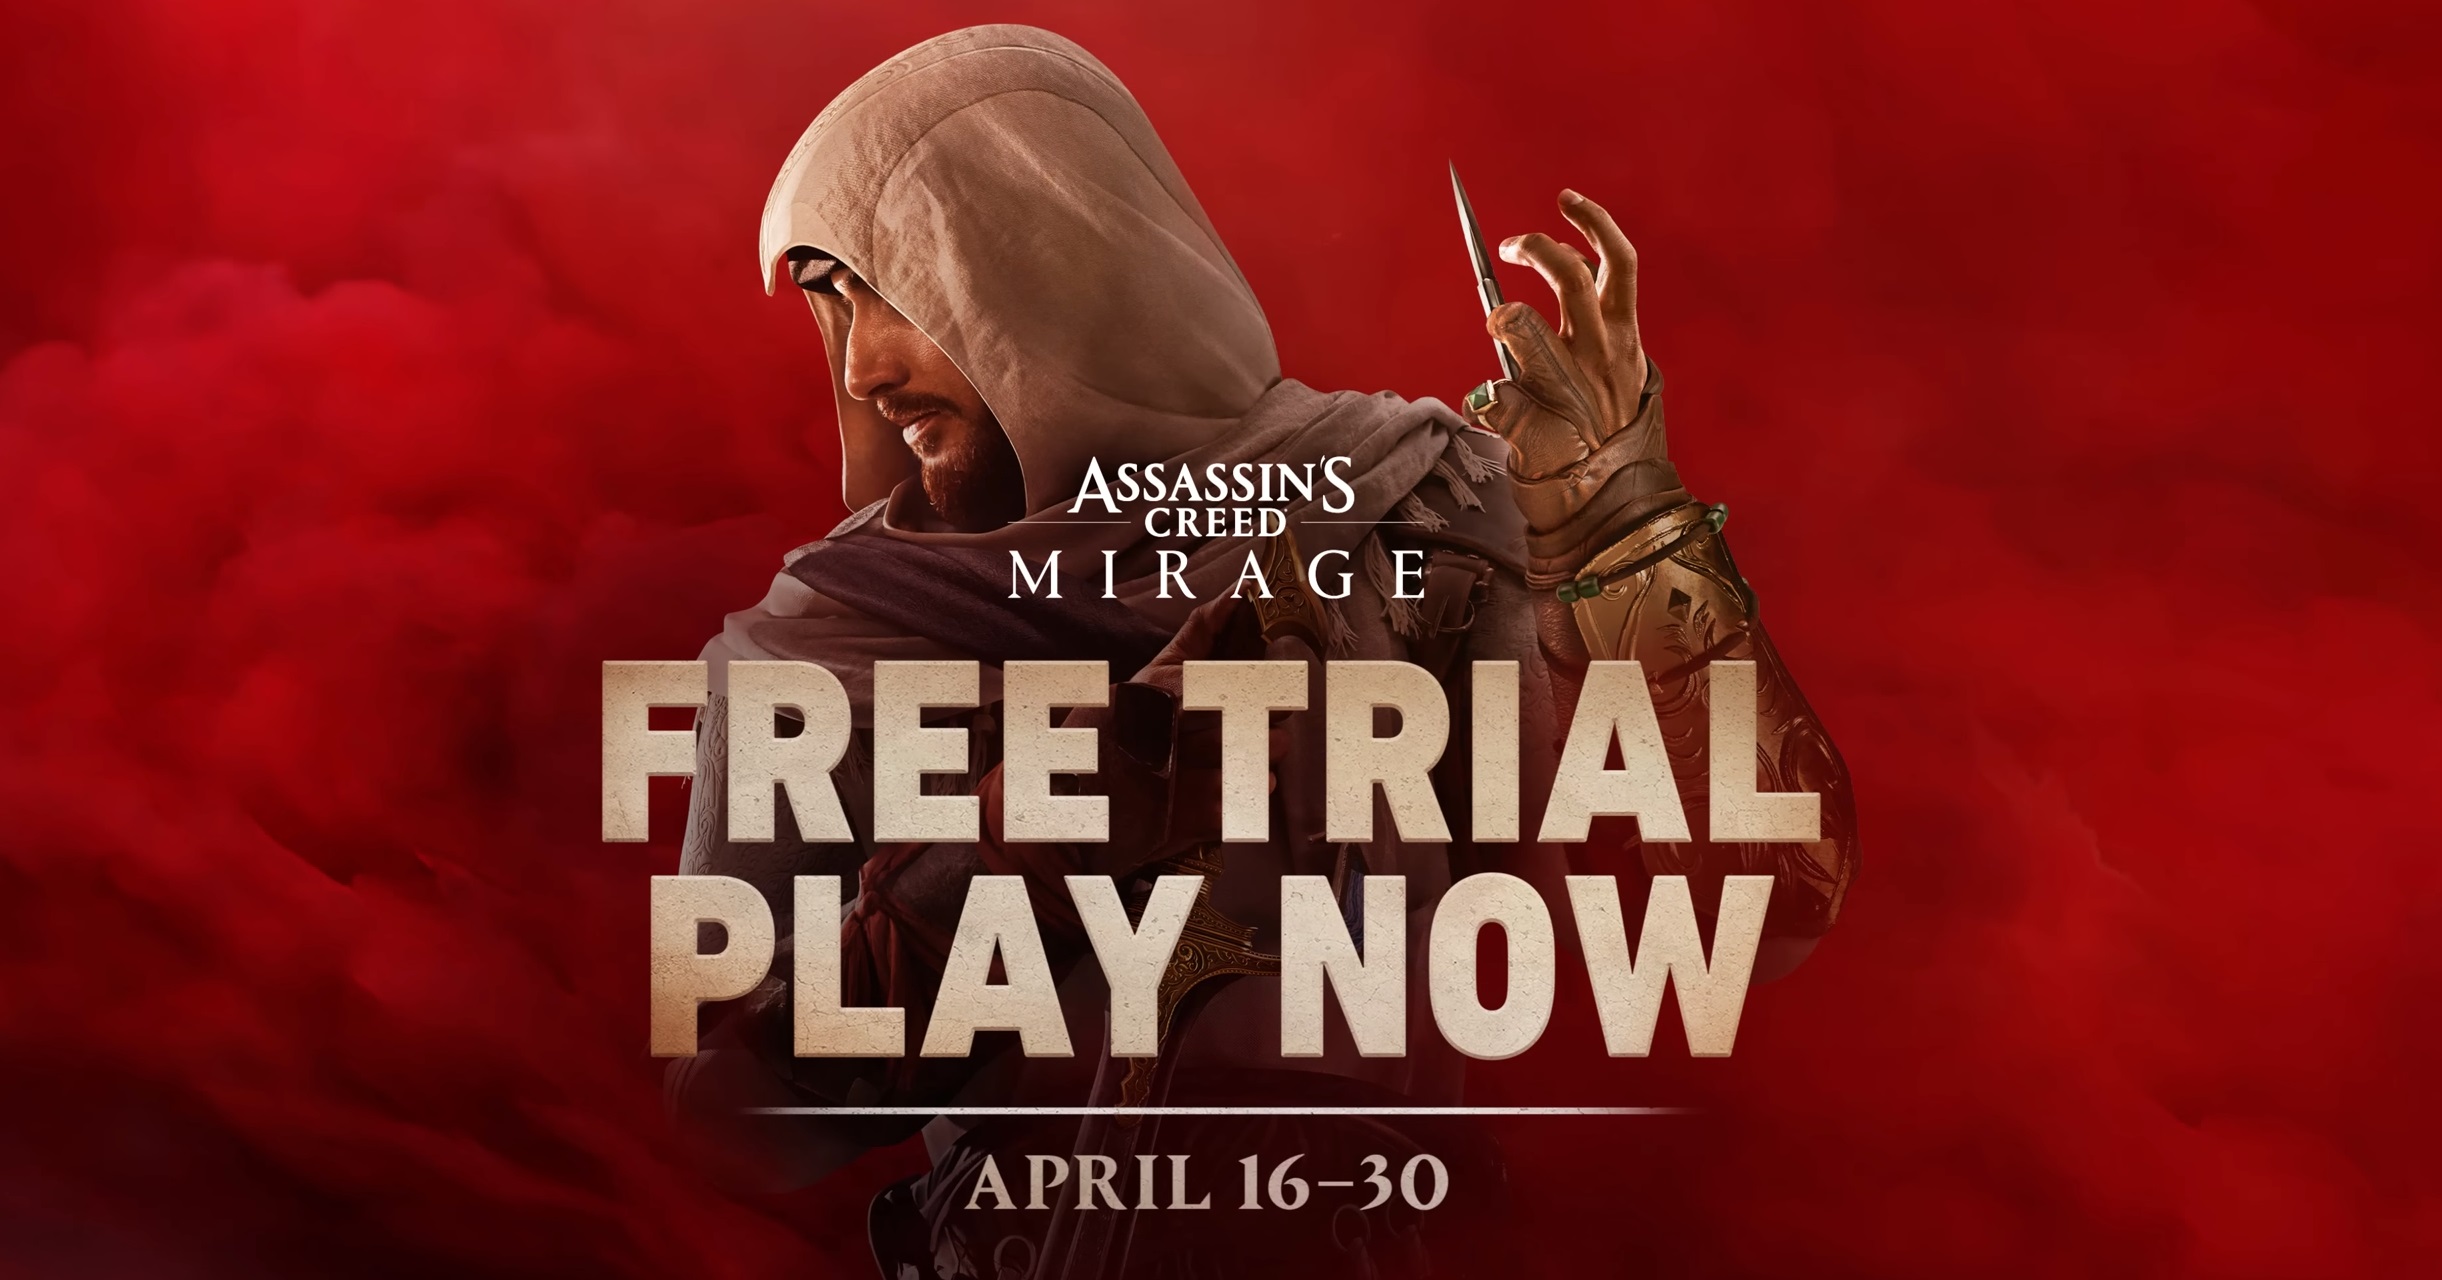 Assassin’s Creed Mirage is free to play until April 30th